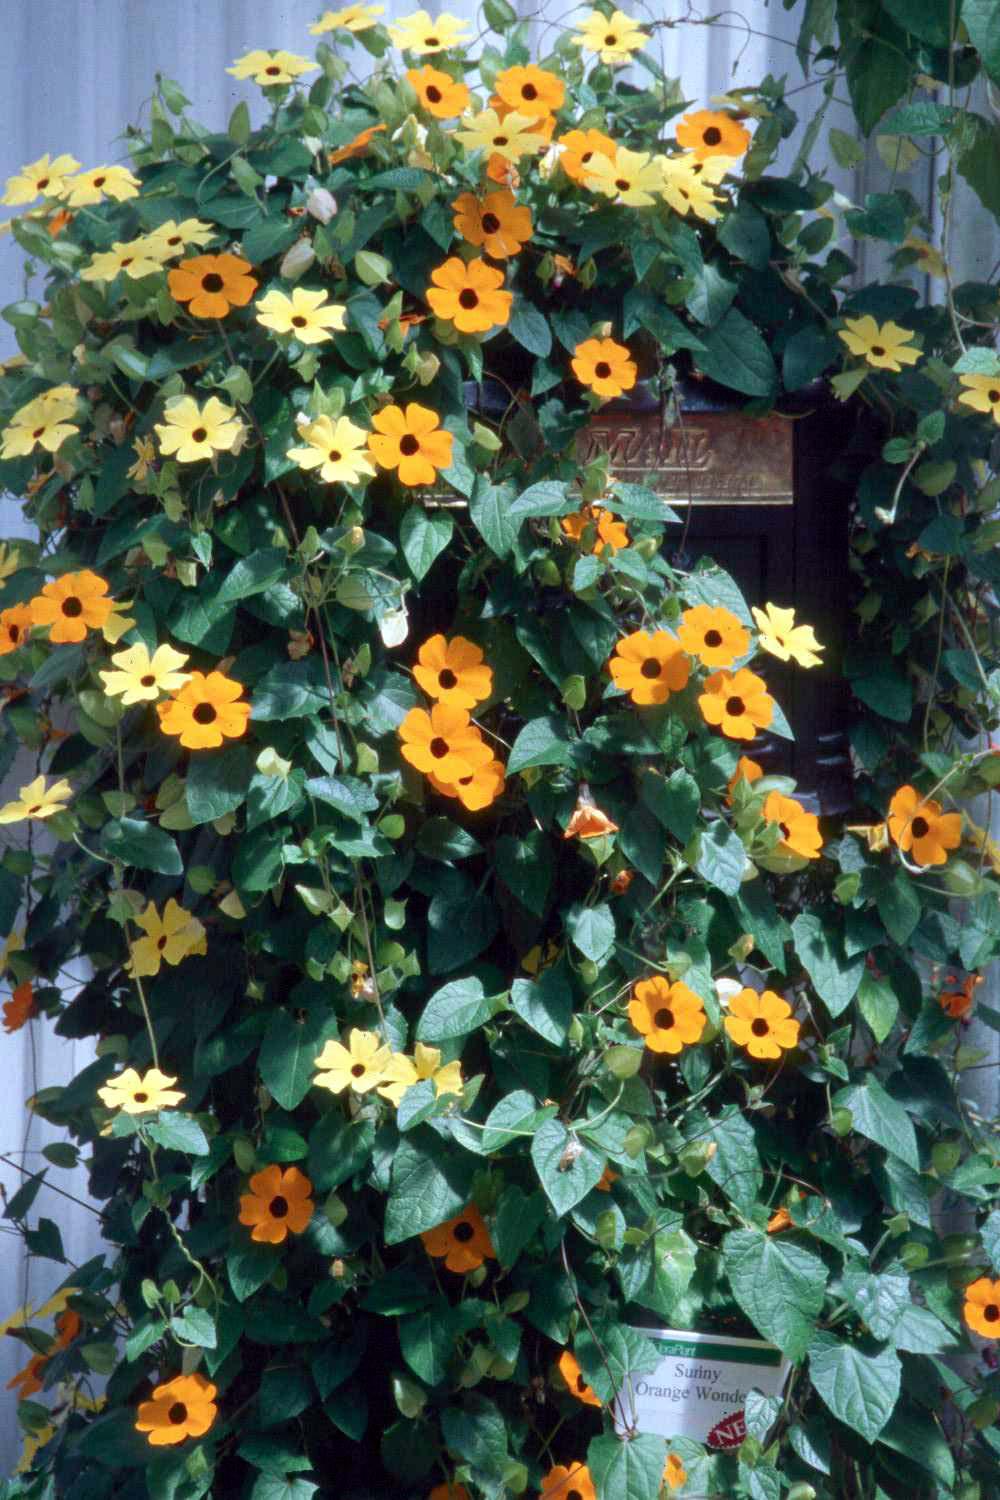 The black-eyed Susan is a very versatile vine. It can be grown at the entrance to the cottage garden or as a bright addition to the tropical garden. Regardless, grow them over an arbor along a fence. They will even work on the mailbox.